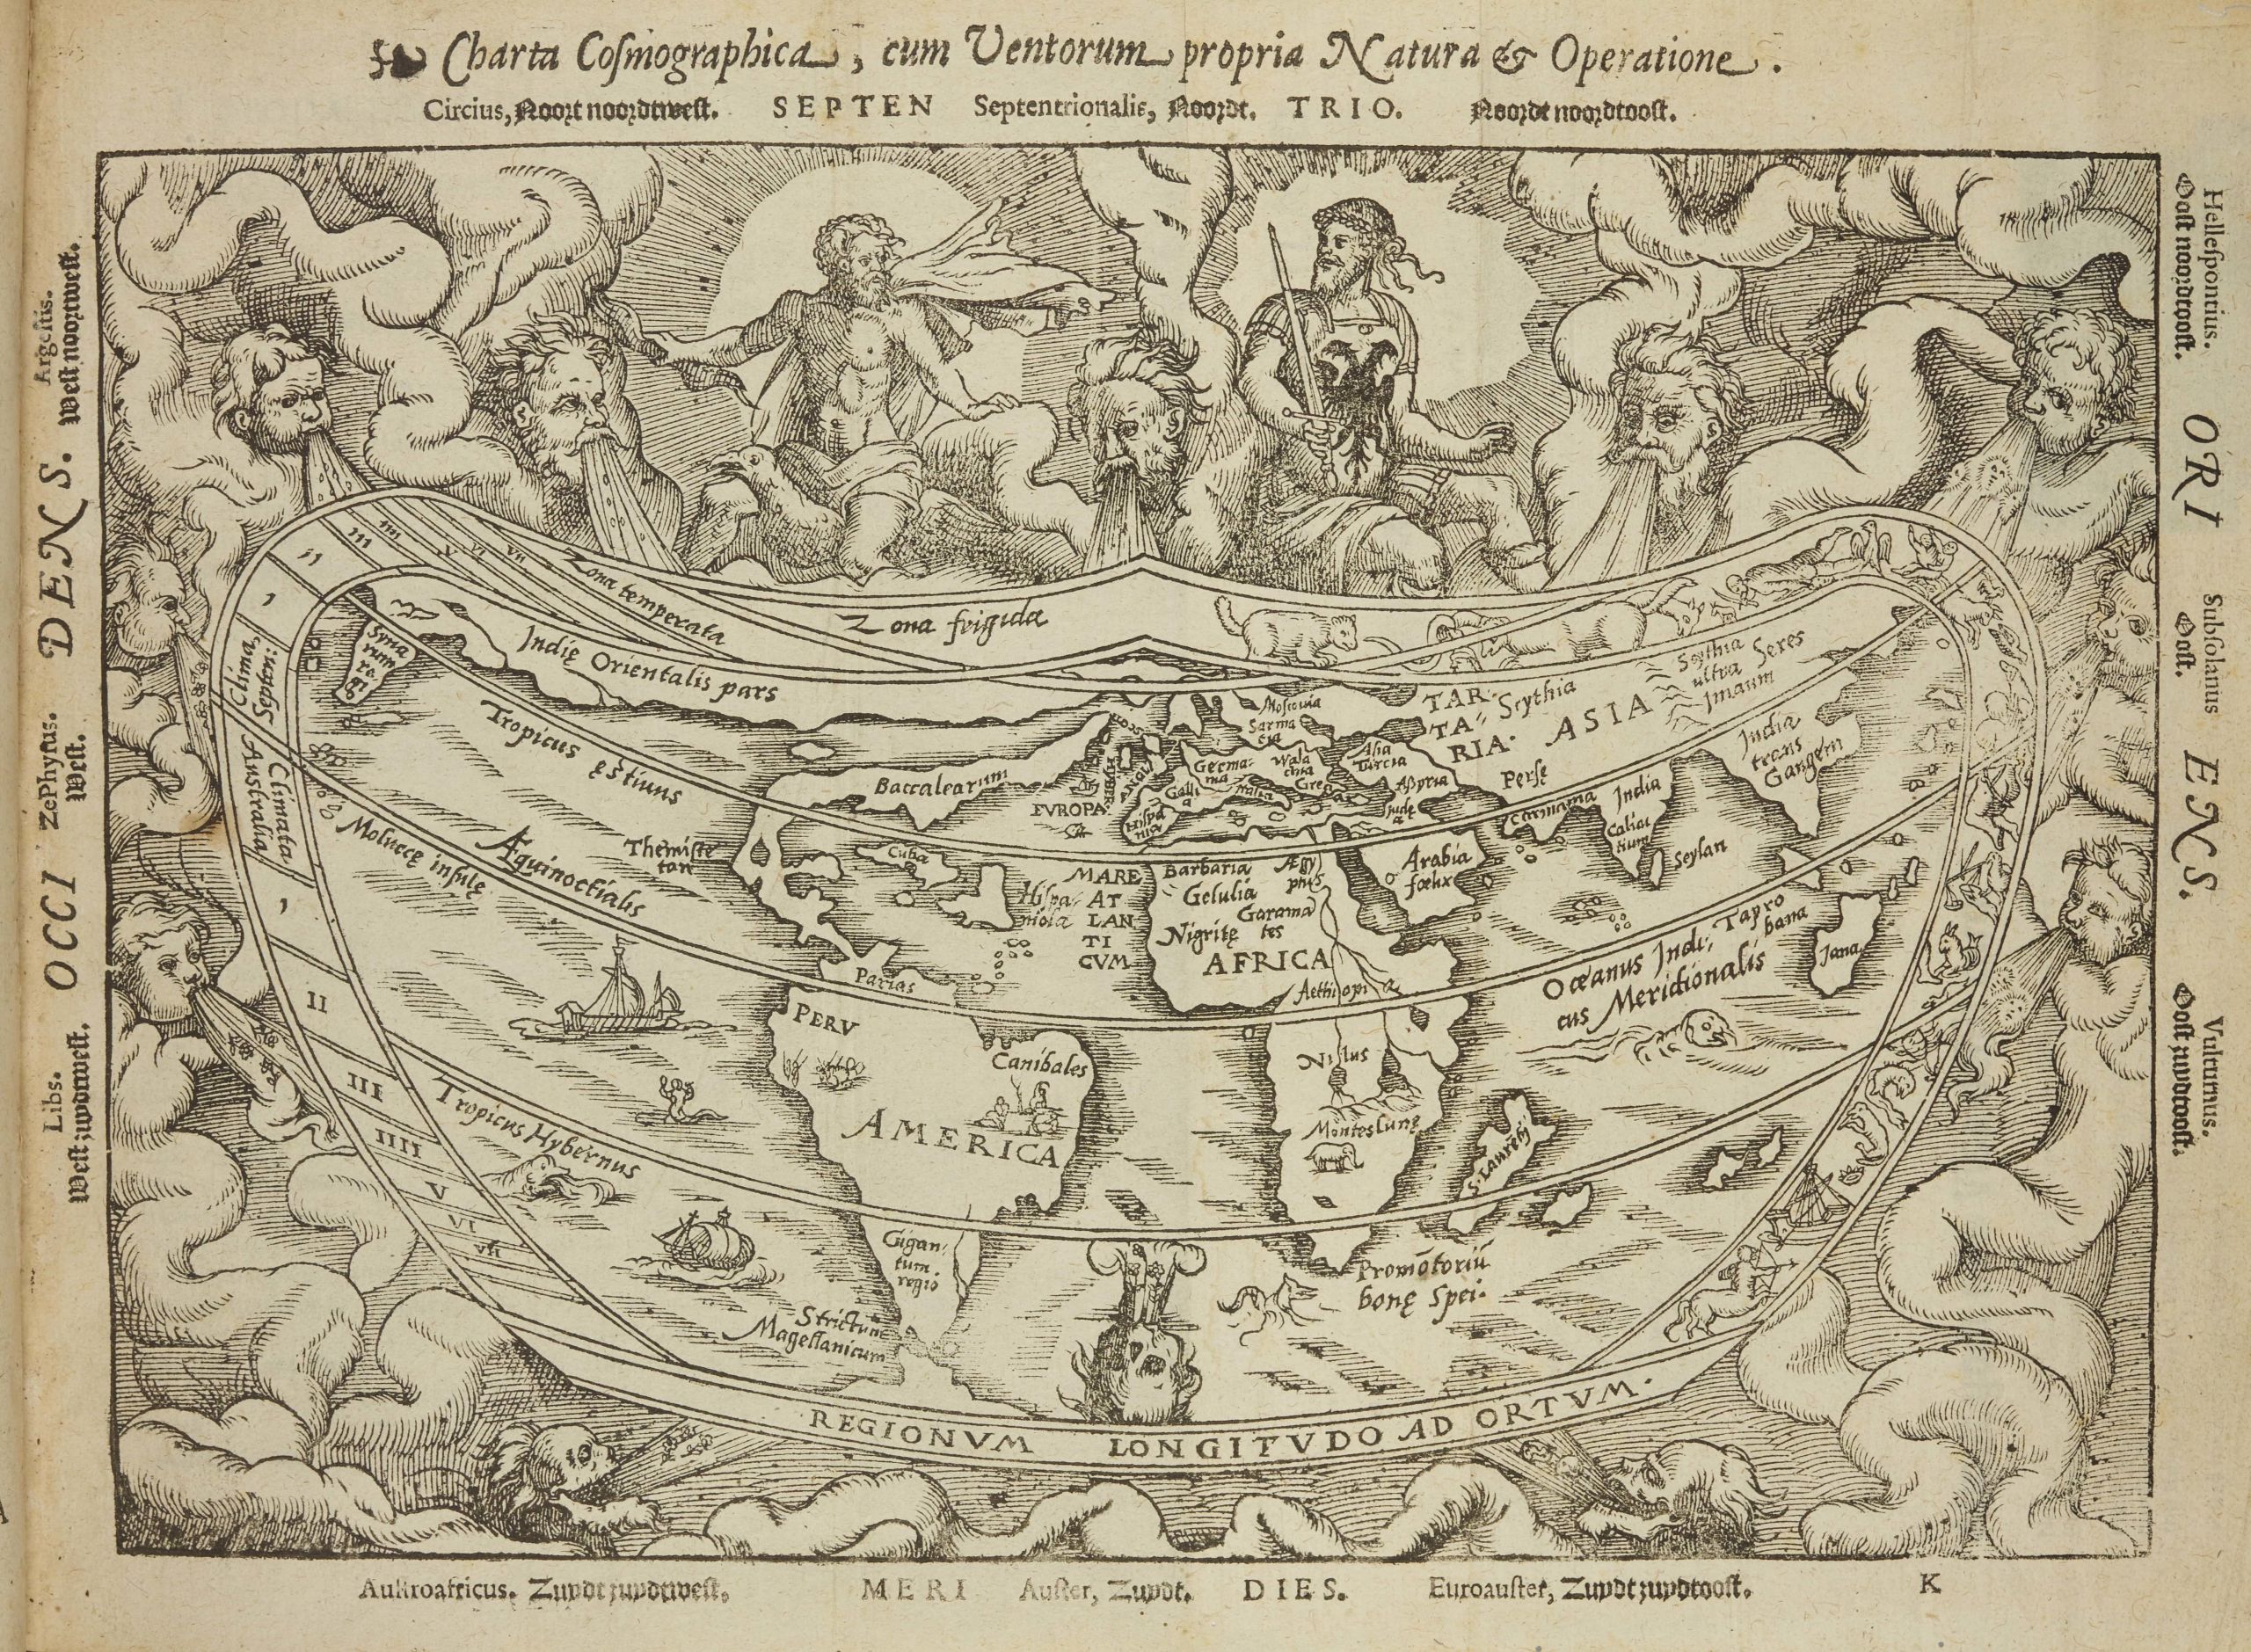 A large scale world map showing a rough understanding of the main landmasses of earth. Outside the map are illustrations of various figures representing Gods and the Earthly elements